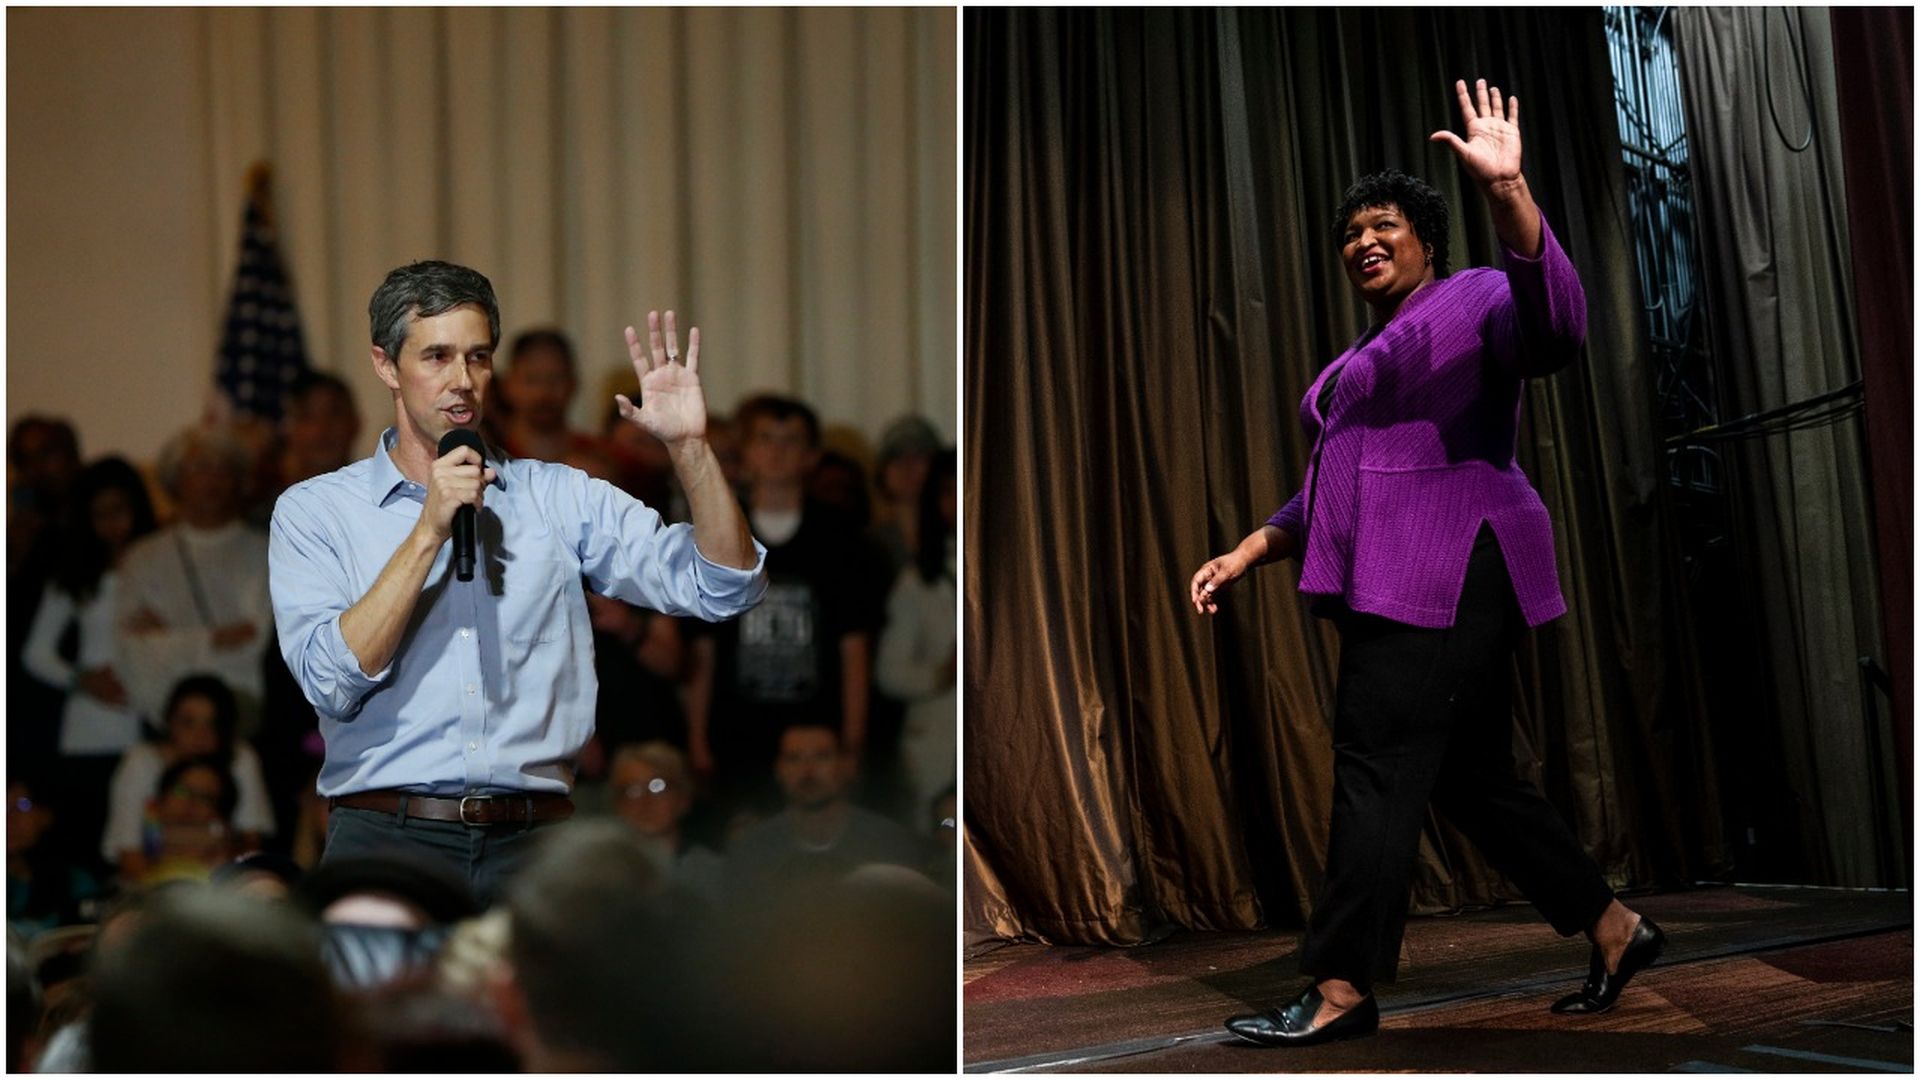 This image is a split-screen of Beto O'Rourke and Stacey Abrams. Stacey walks across a stage and waves as Beto talks into a microphone.